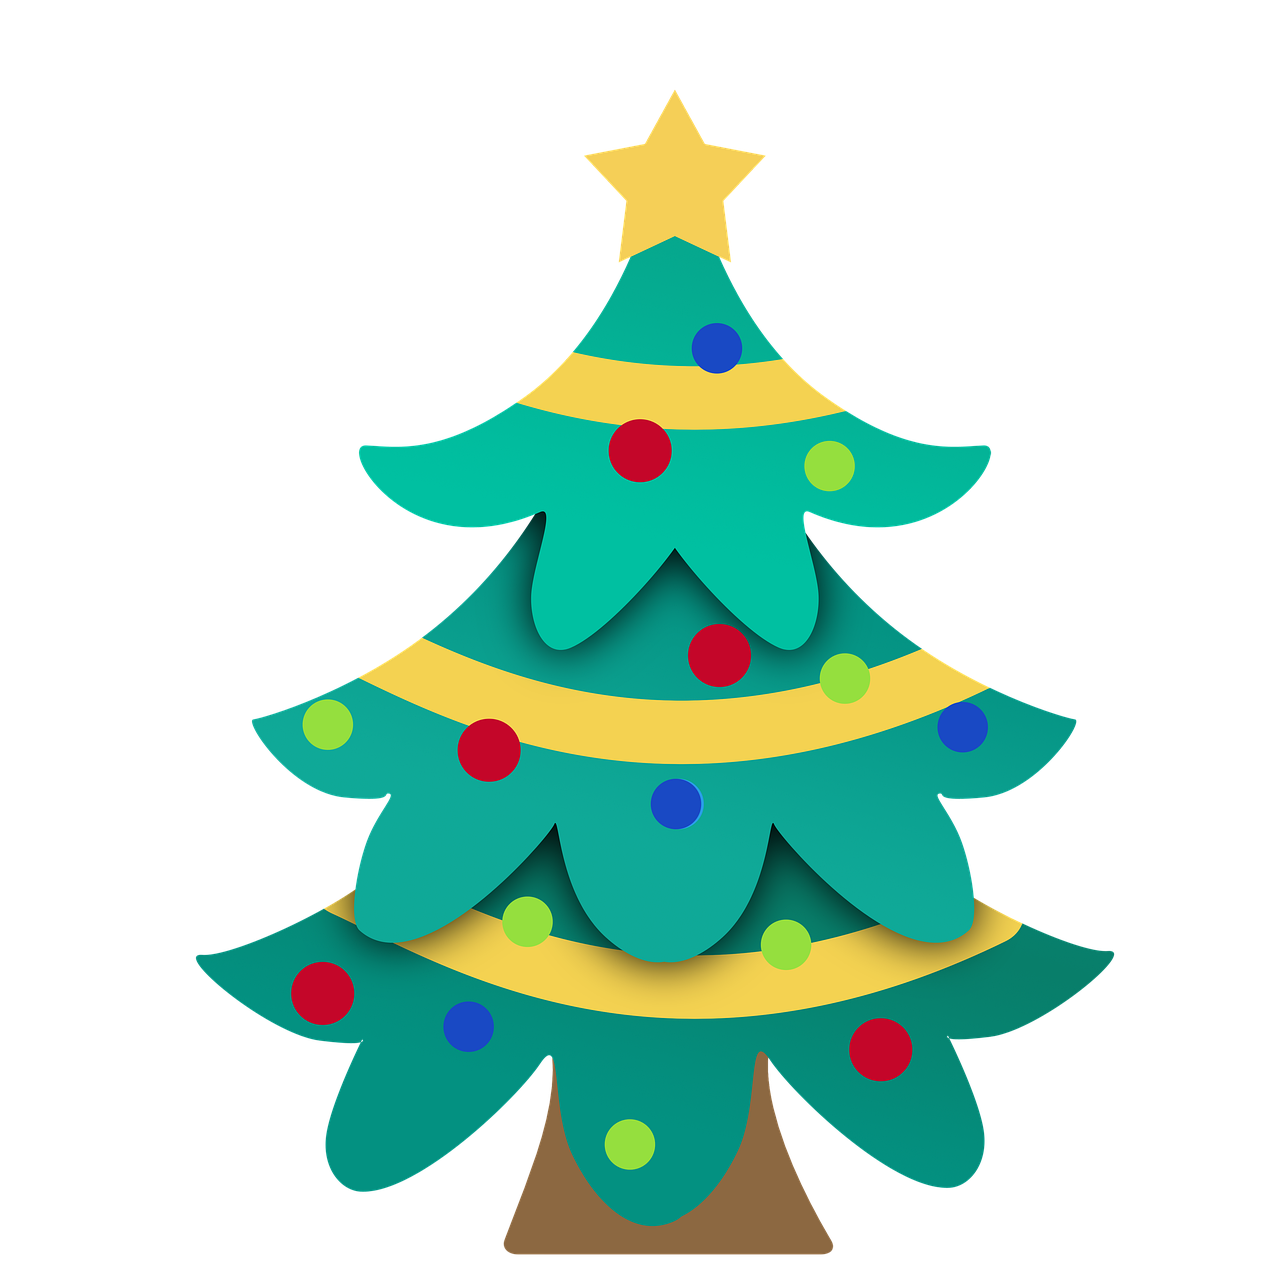 a christmas tree with a star on top, inspired by Ernest William Christmas, pixabay, folk art, paper cutouts of plain colors, 3/4 front view, animation, black fir